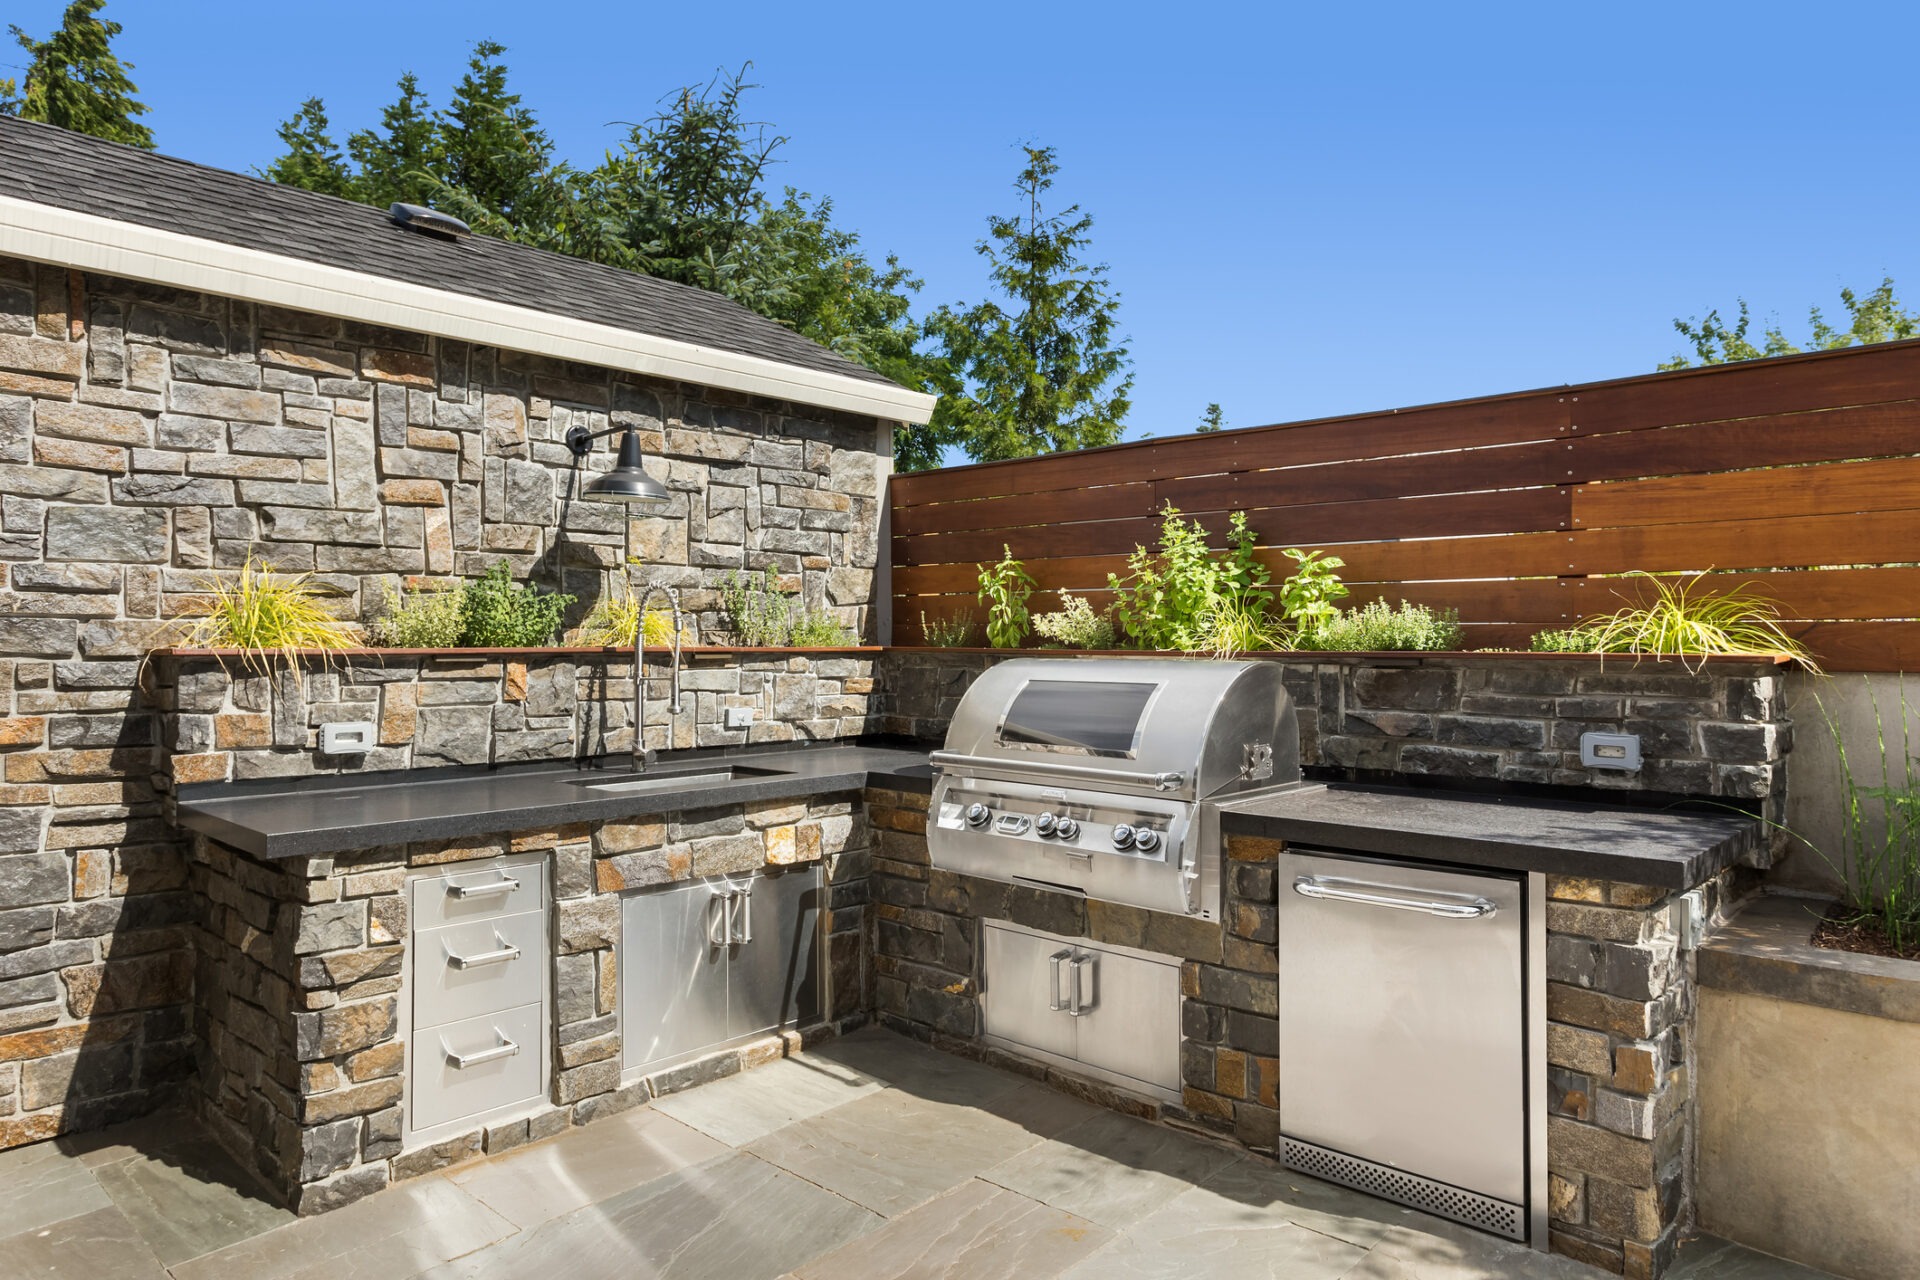 Outdoor kitchen with stone facade, stainless steel appliances, and a grill; set against a backdrop of trees and a wooden fence, under a clear sky.